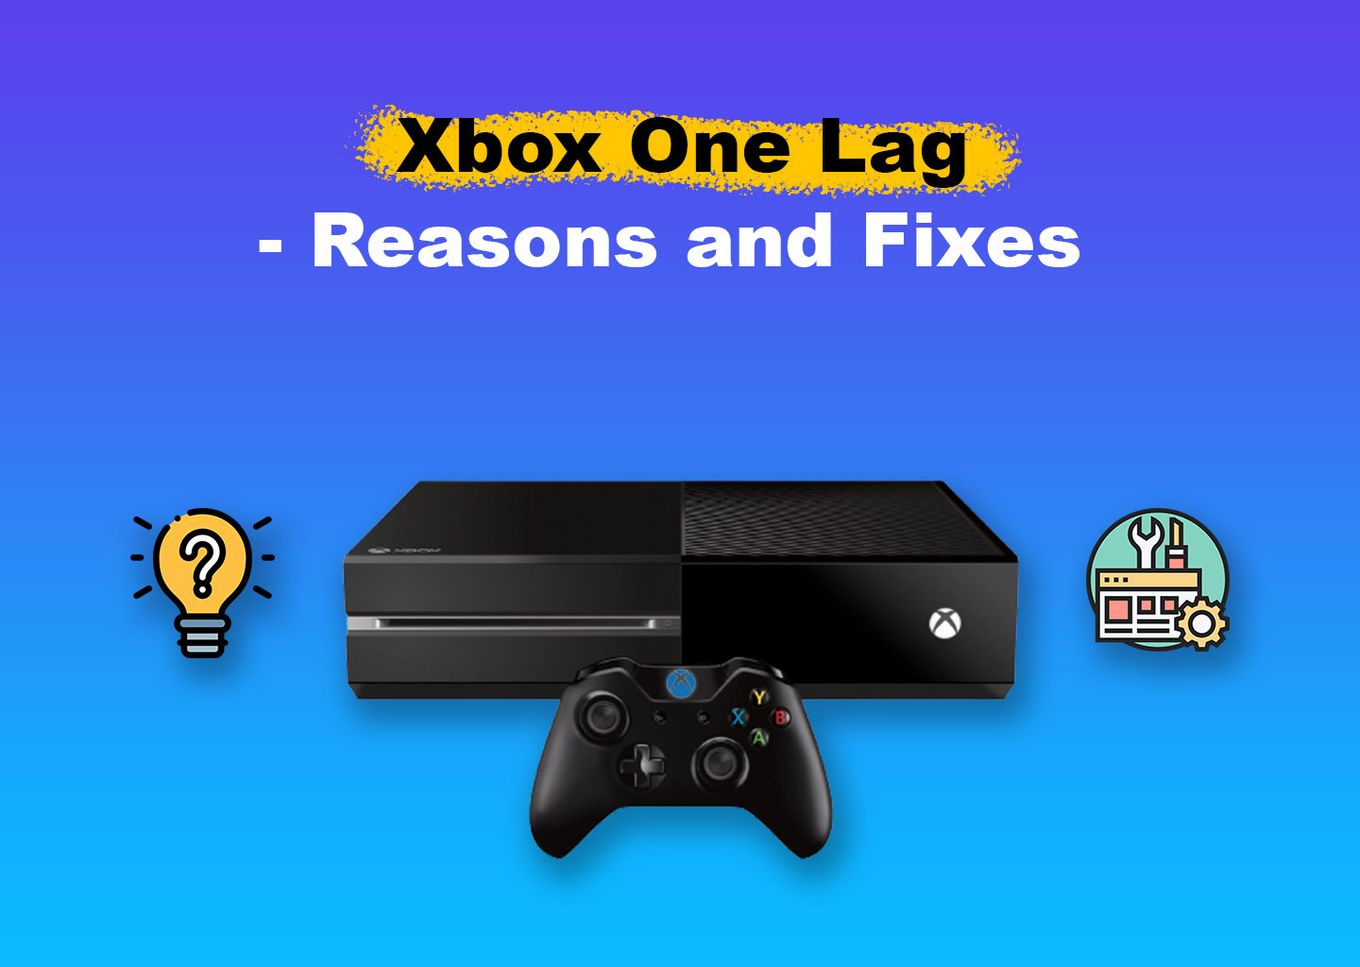 How to fix lag on an Xbox One